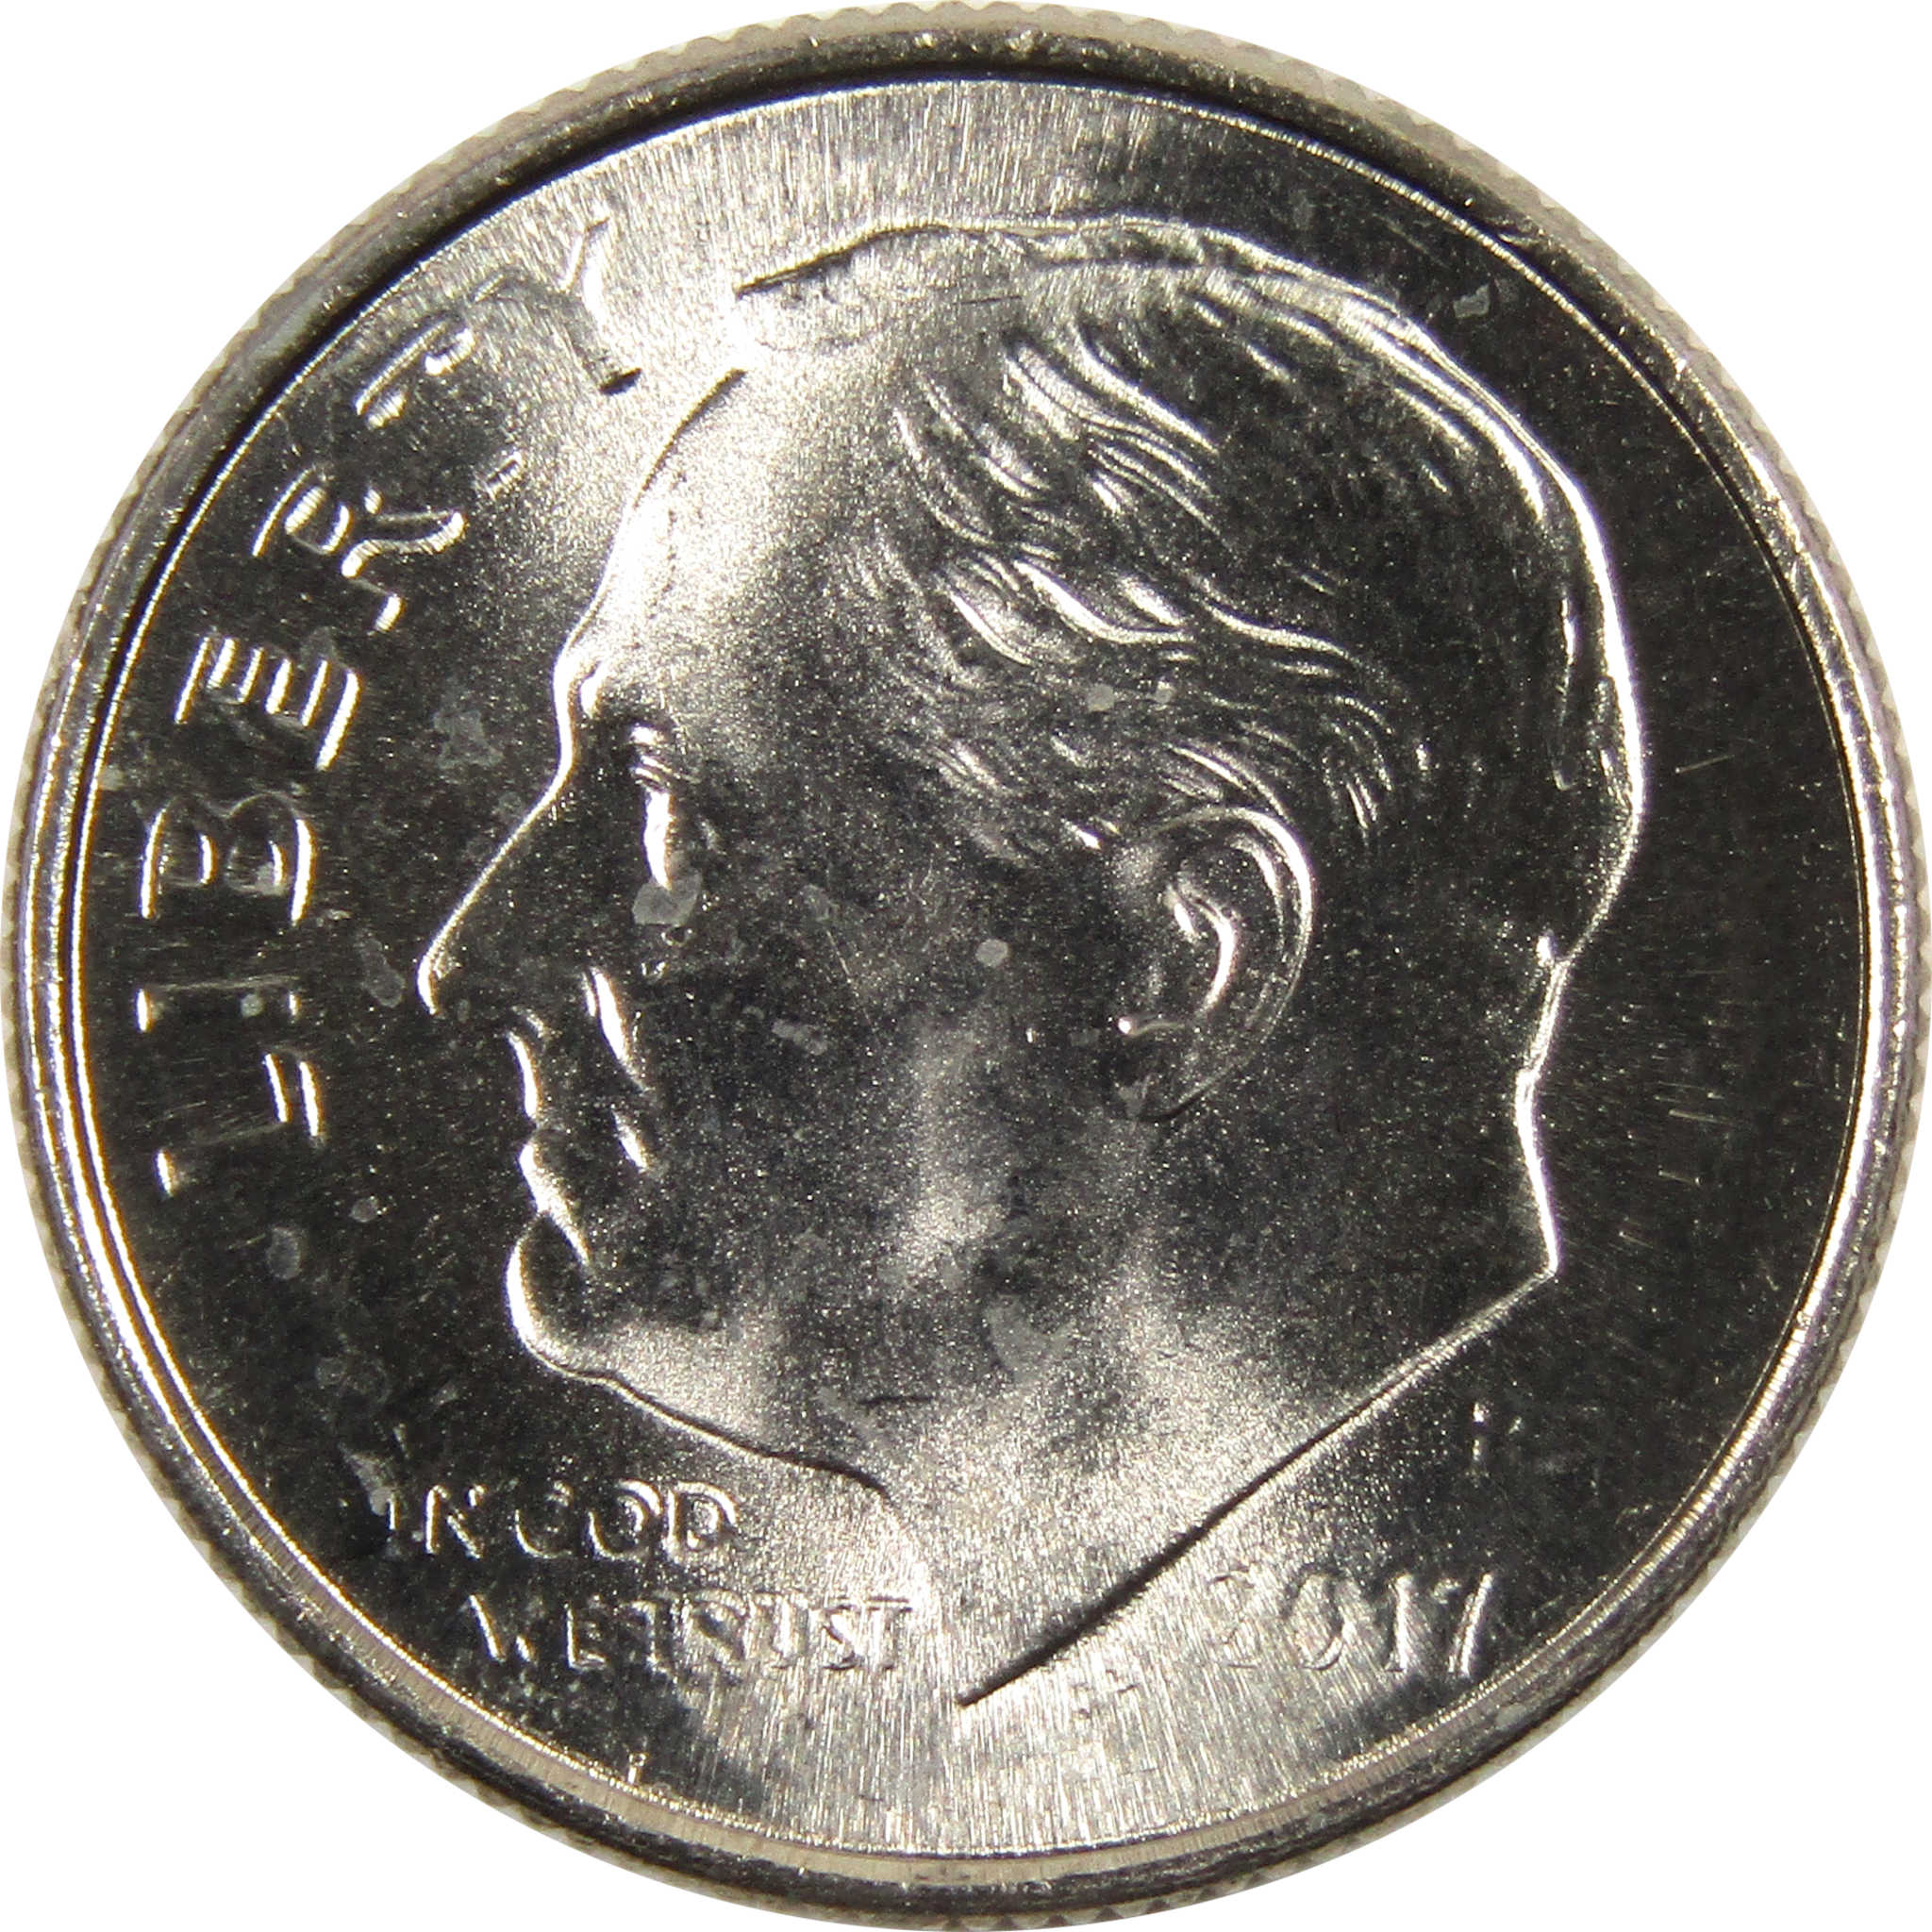 2017 P Roosevelt Dime BU Uncirculated Clad 10c Coin